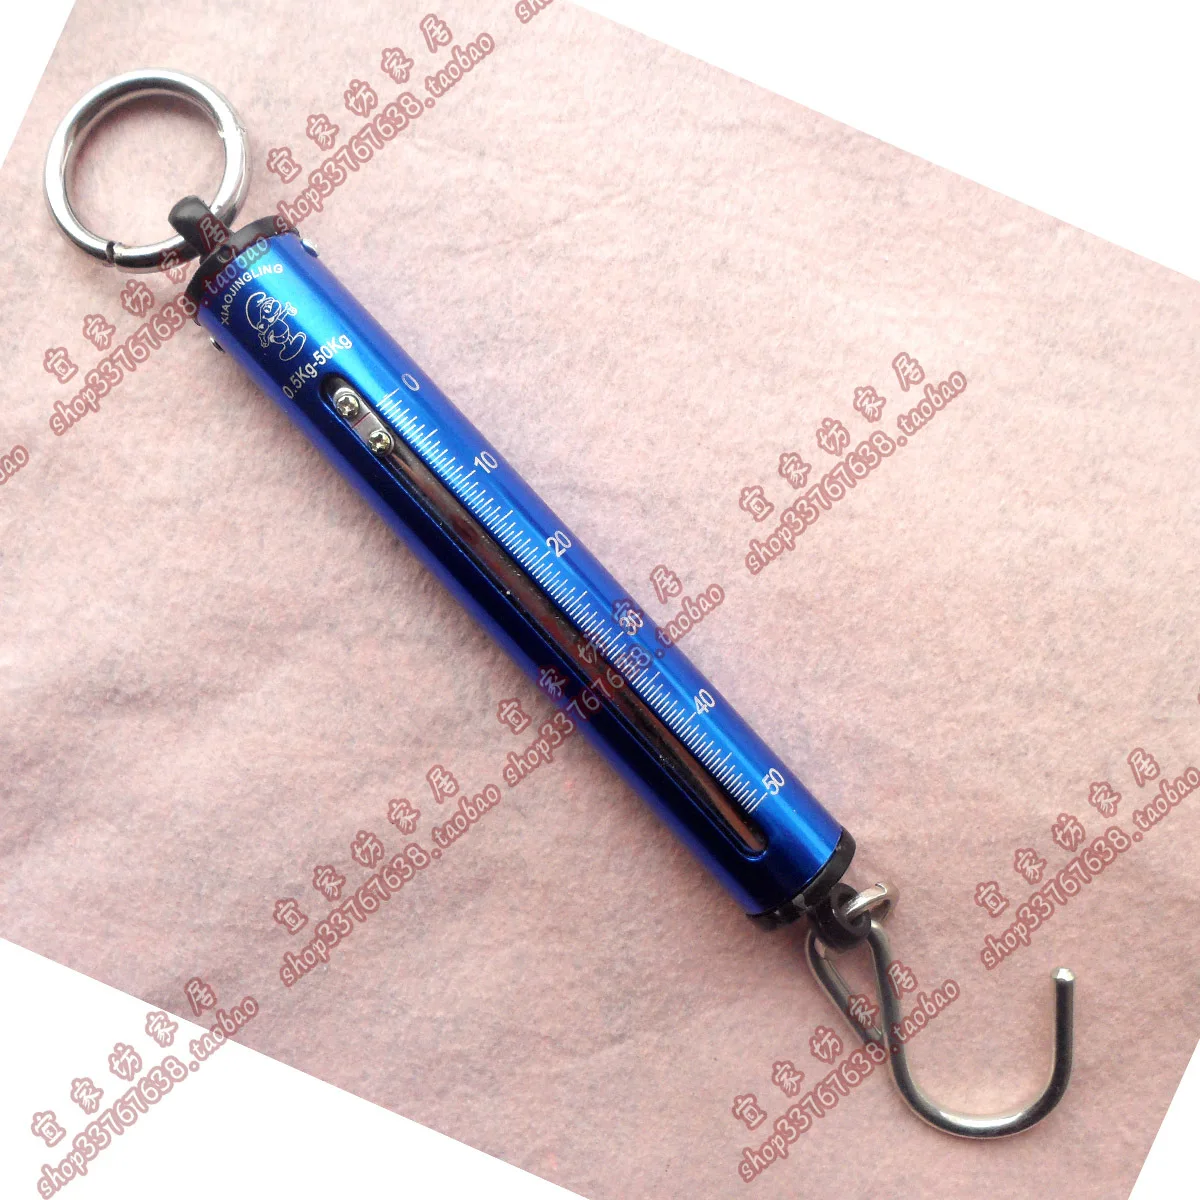 Image 50kg portable scale portable scales spring balance hook scale pocket size scales 0.5kg 50